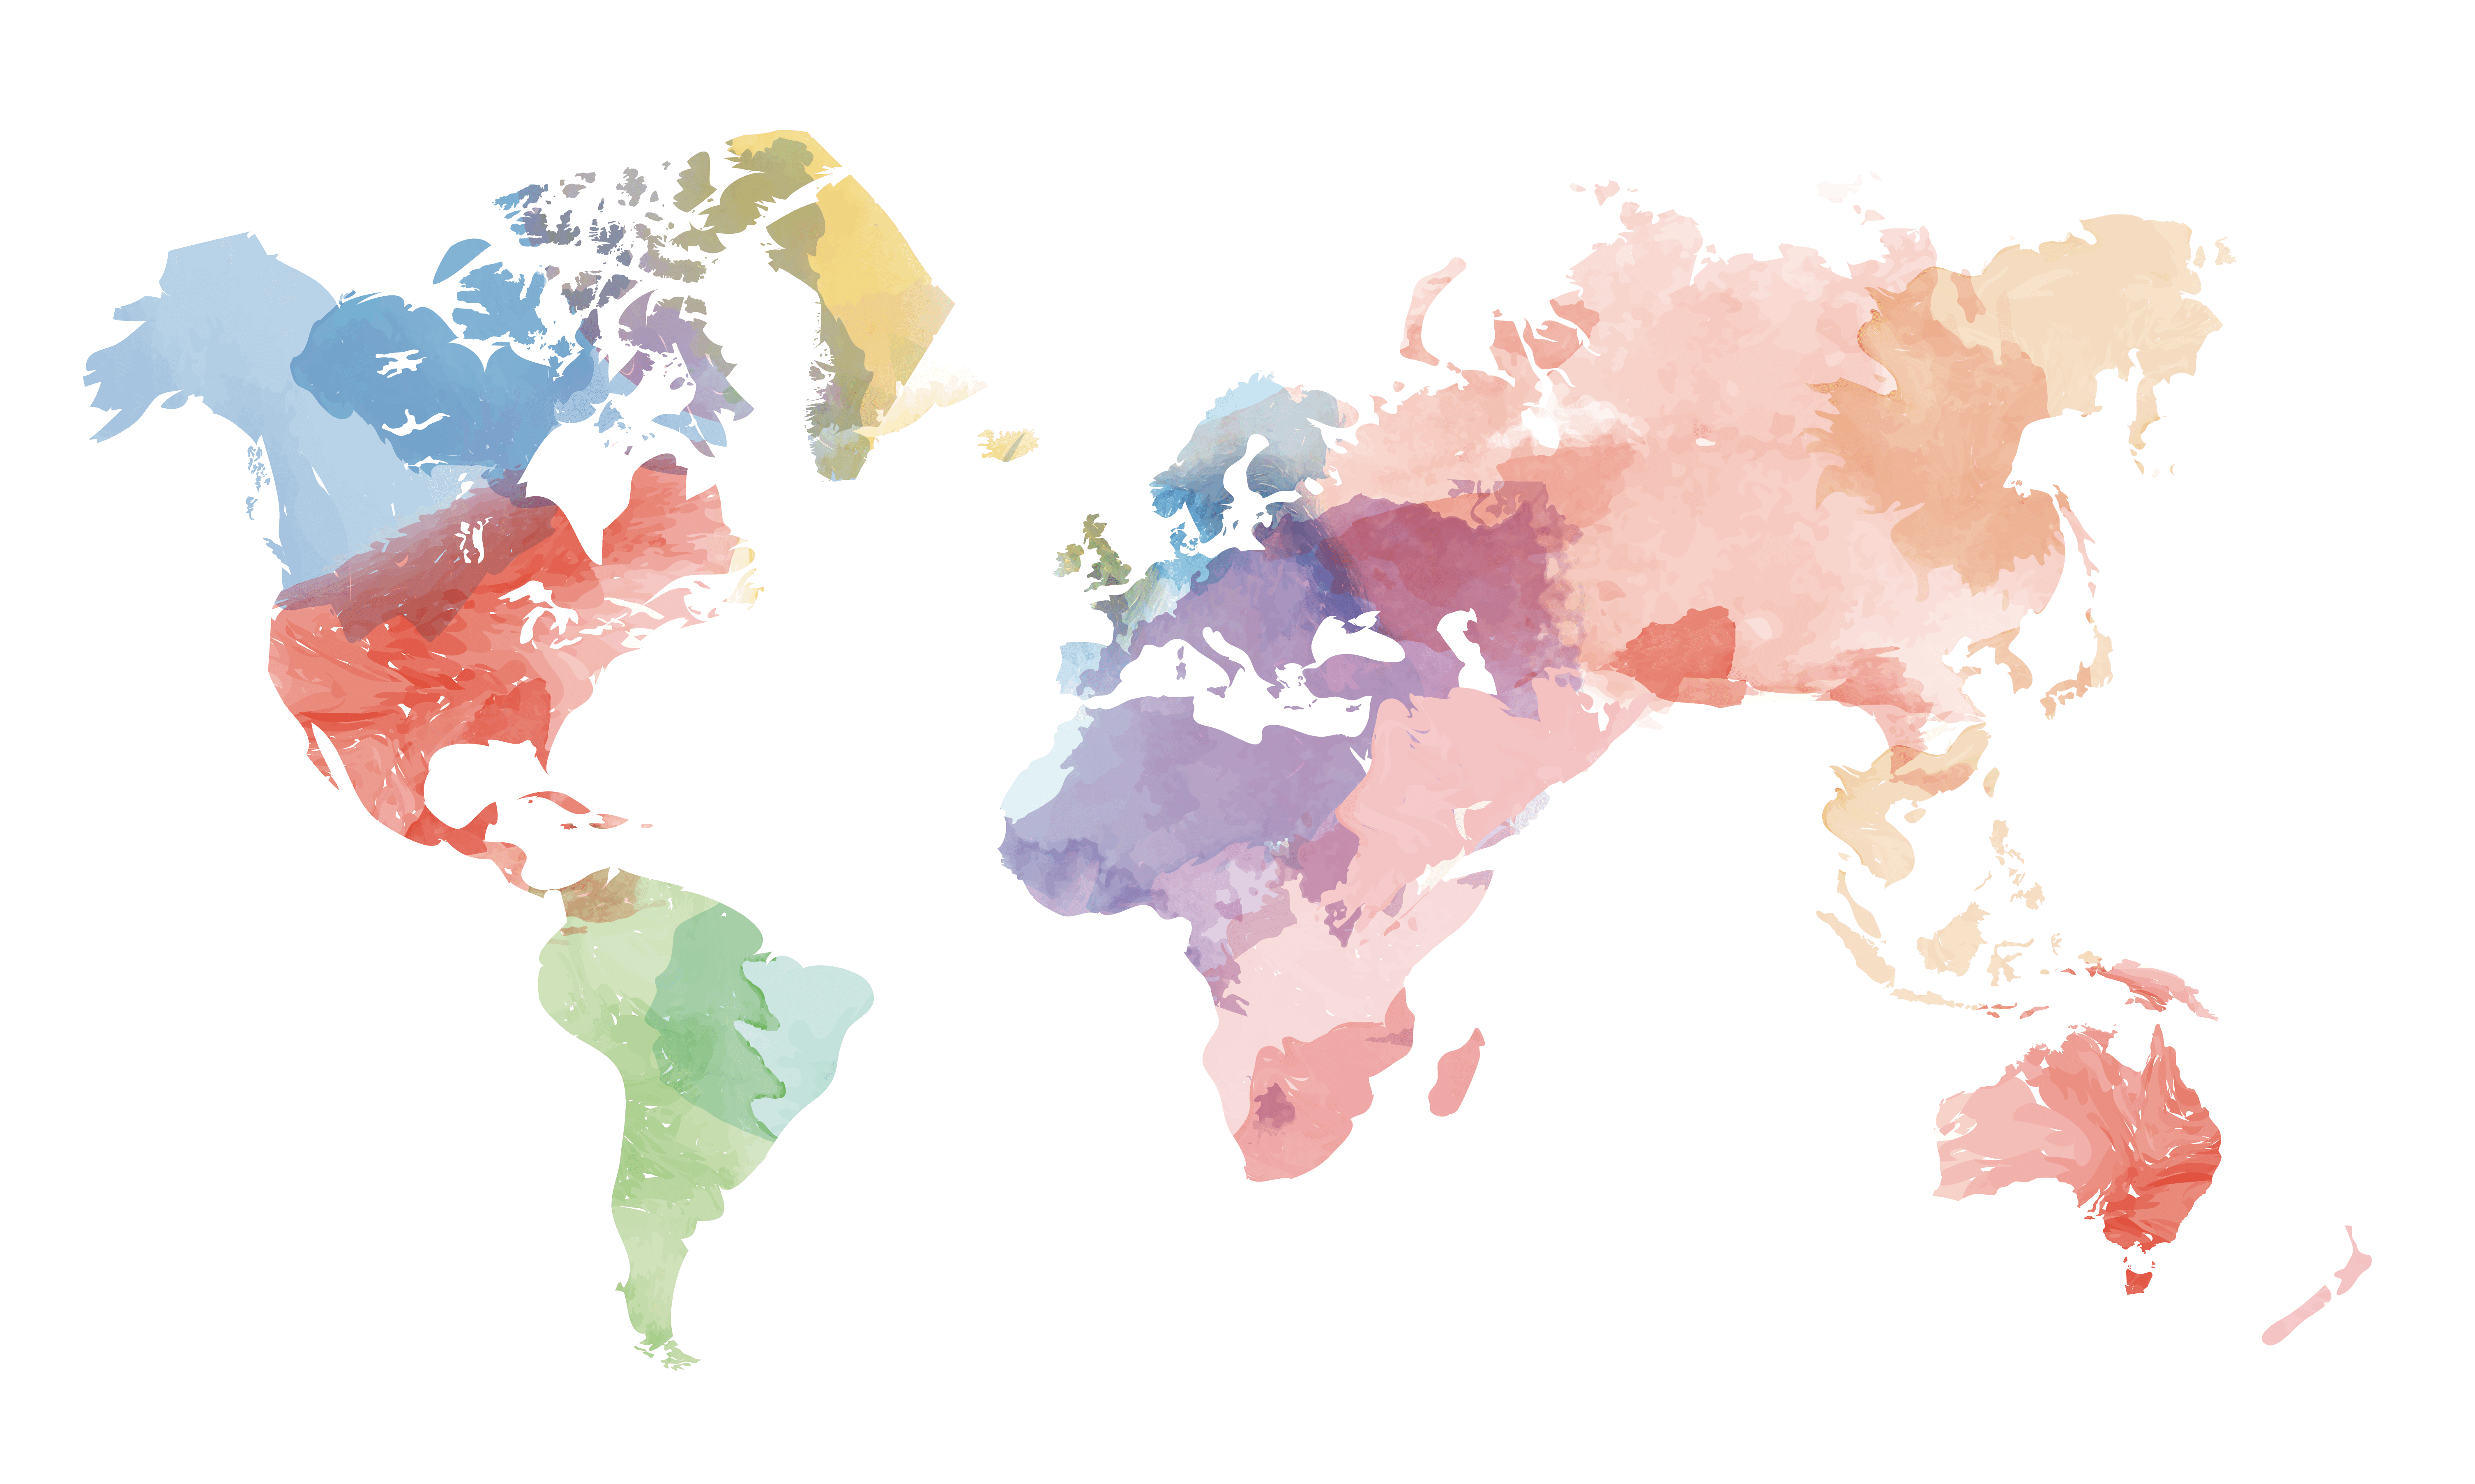 Colorful World Map Wallpapers Top Free Colorful World Map Backgrounds Wallpaperaccess